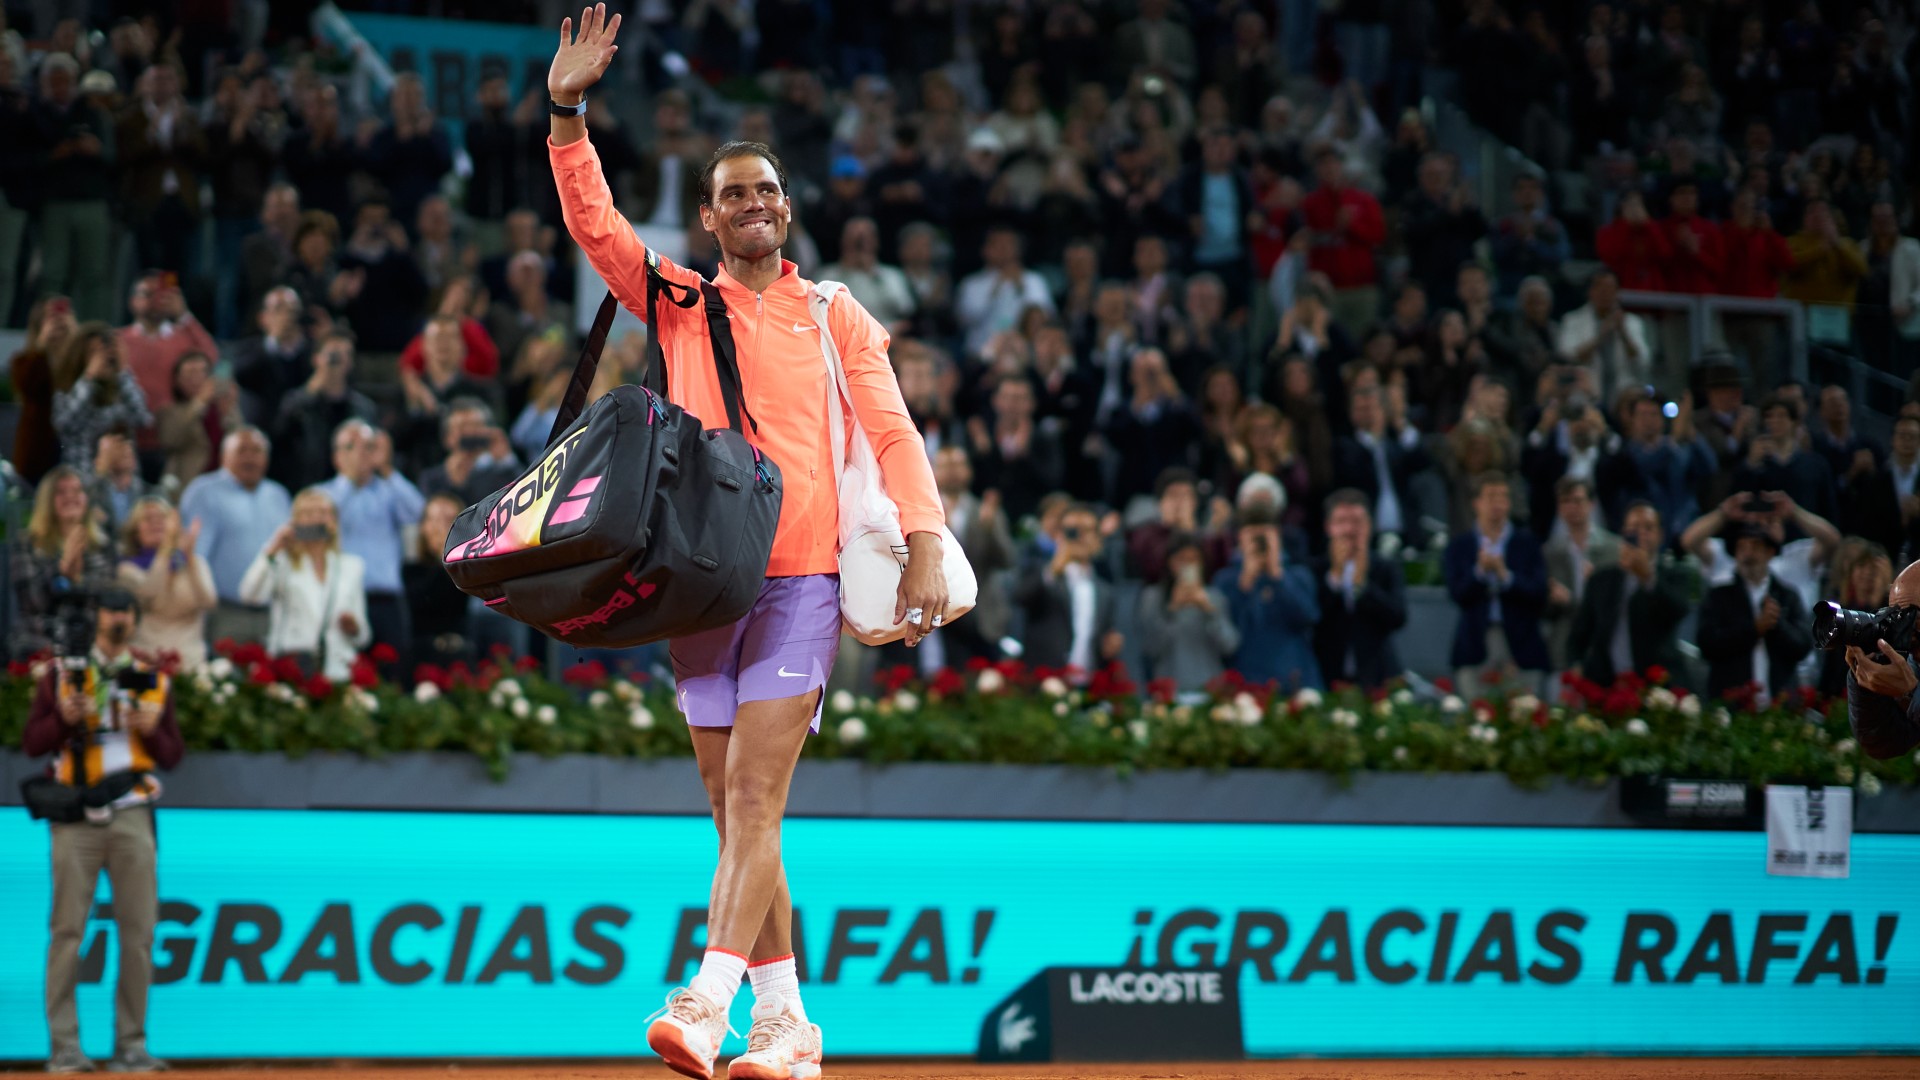 Nadal: 'I cannot thank you enough'